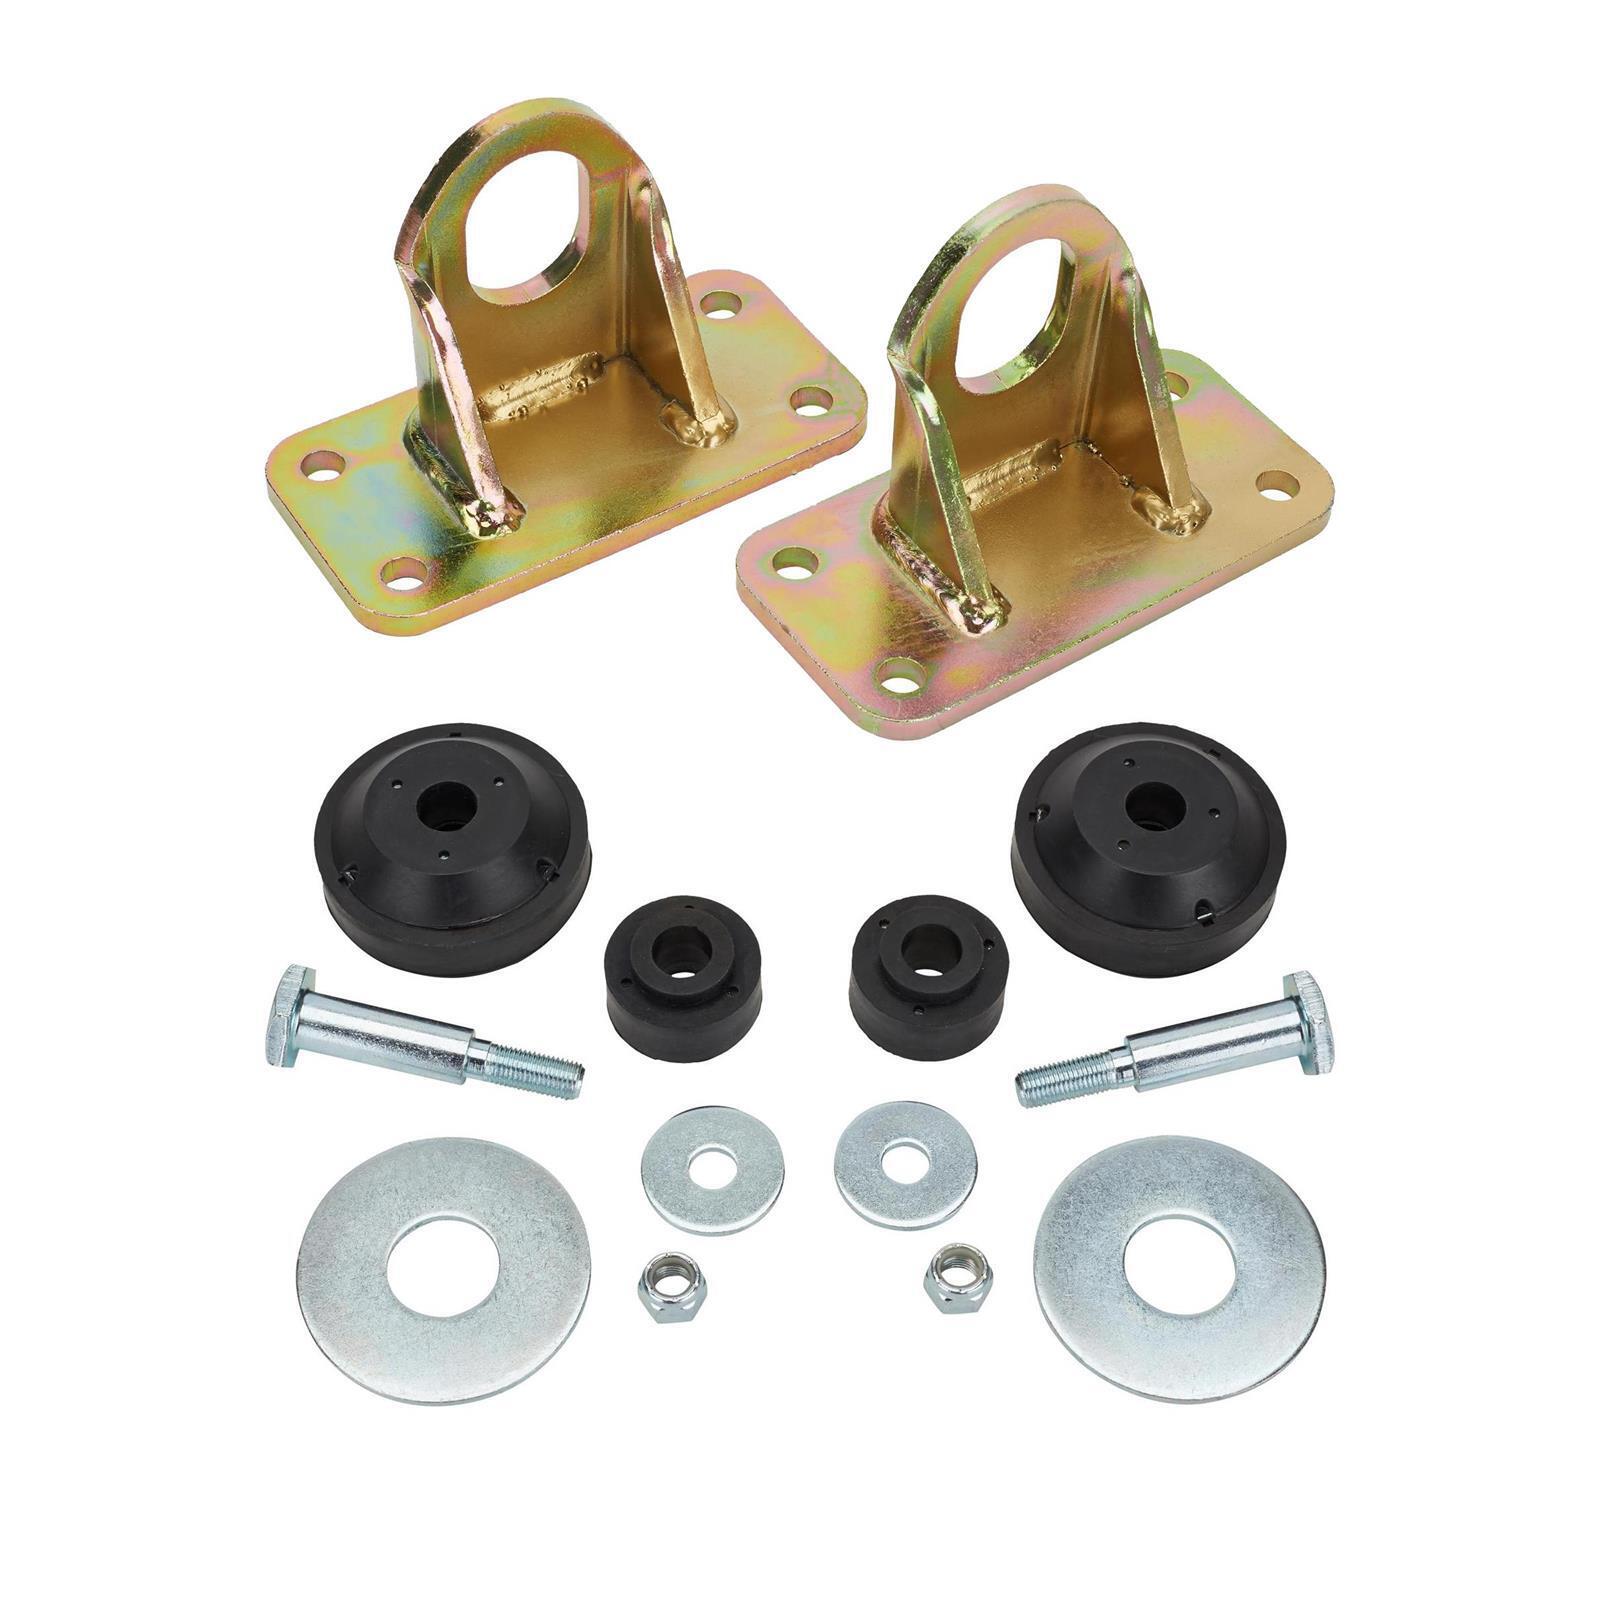 Motor Mount Frame Adapters & Engine Cushion Kit, Fits 1928-34 Ford